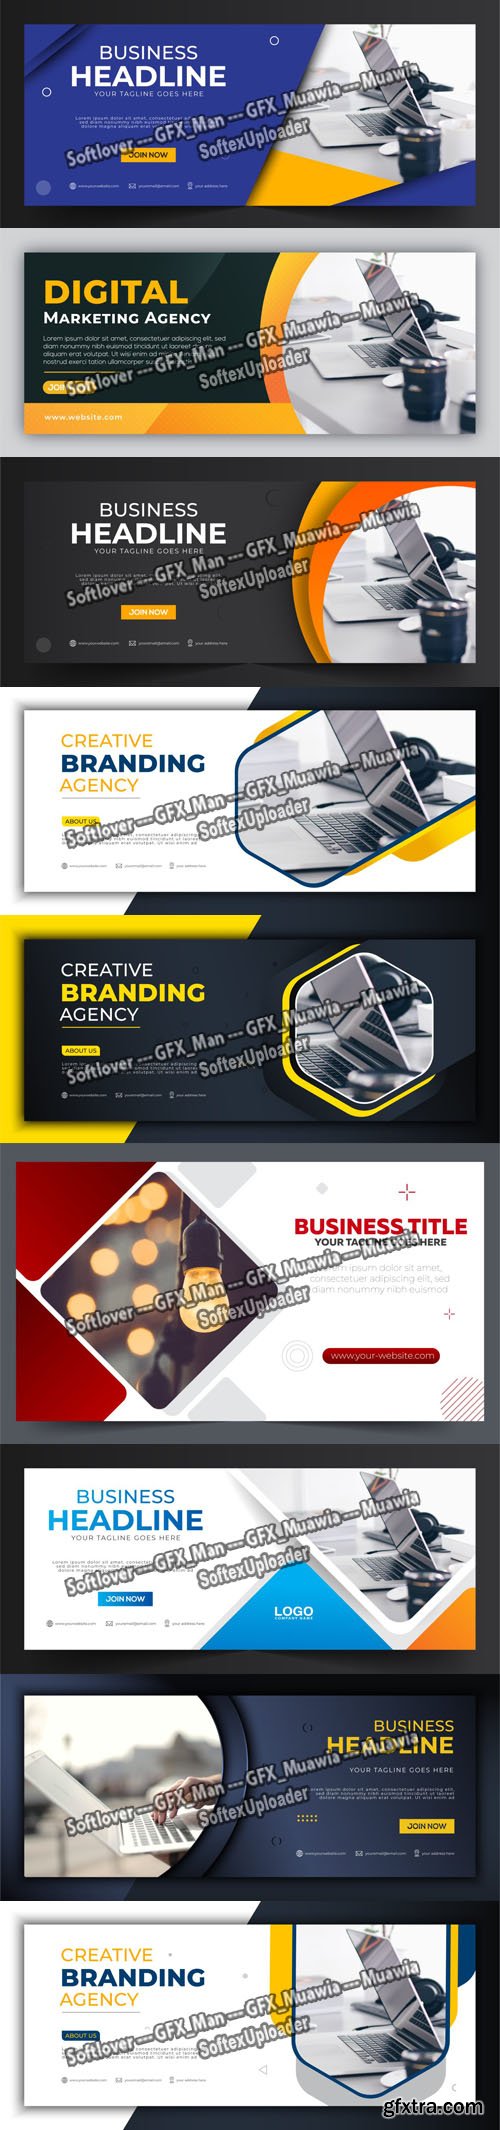 18 Professional Web Banners & Facebook Covers Templates Collection